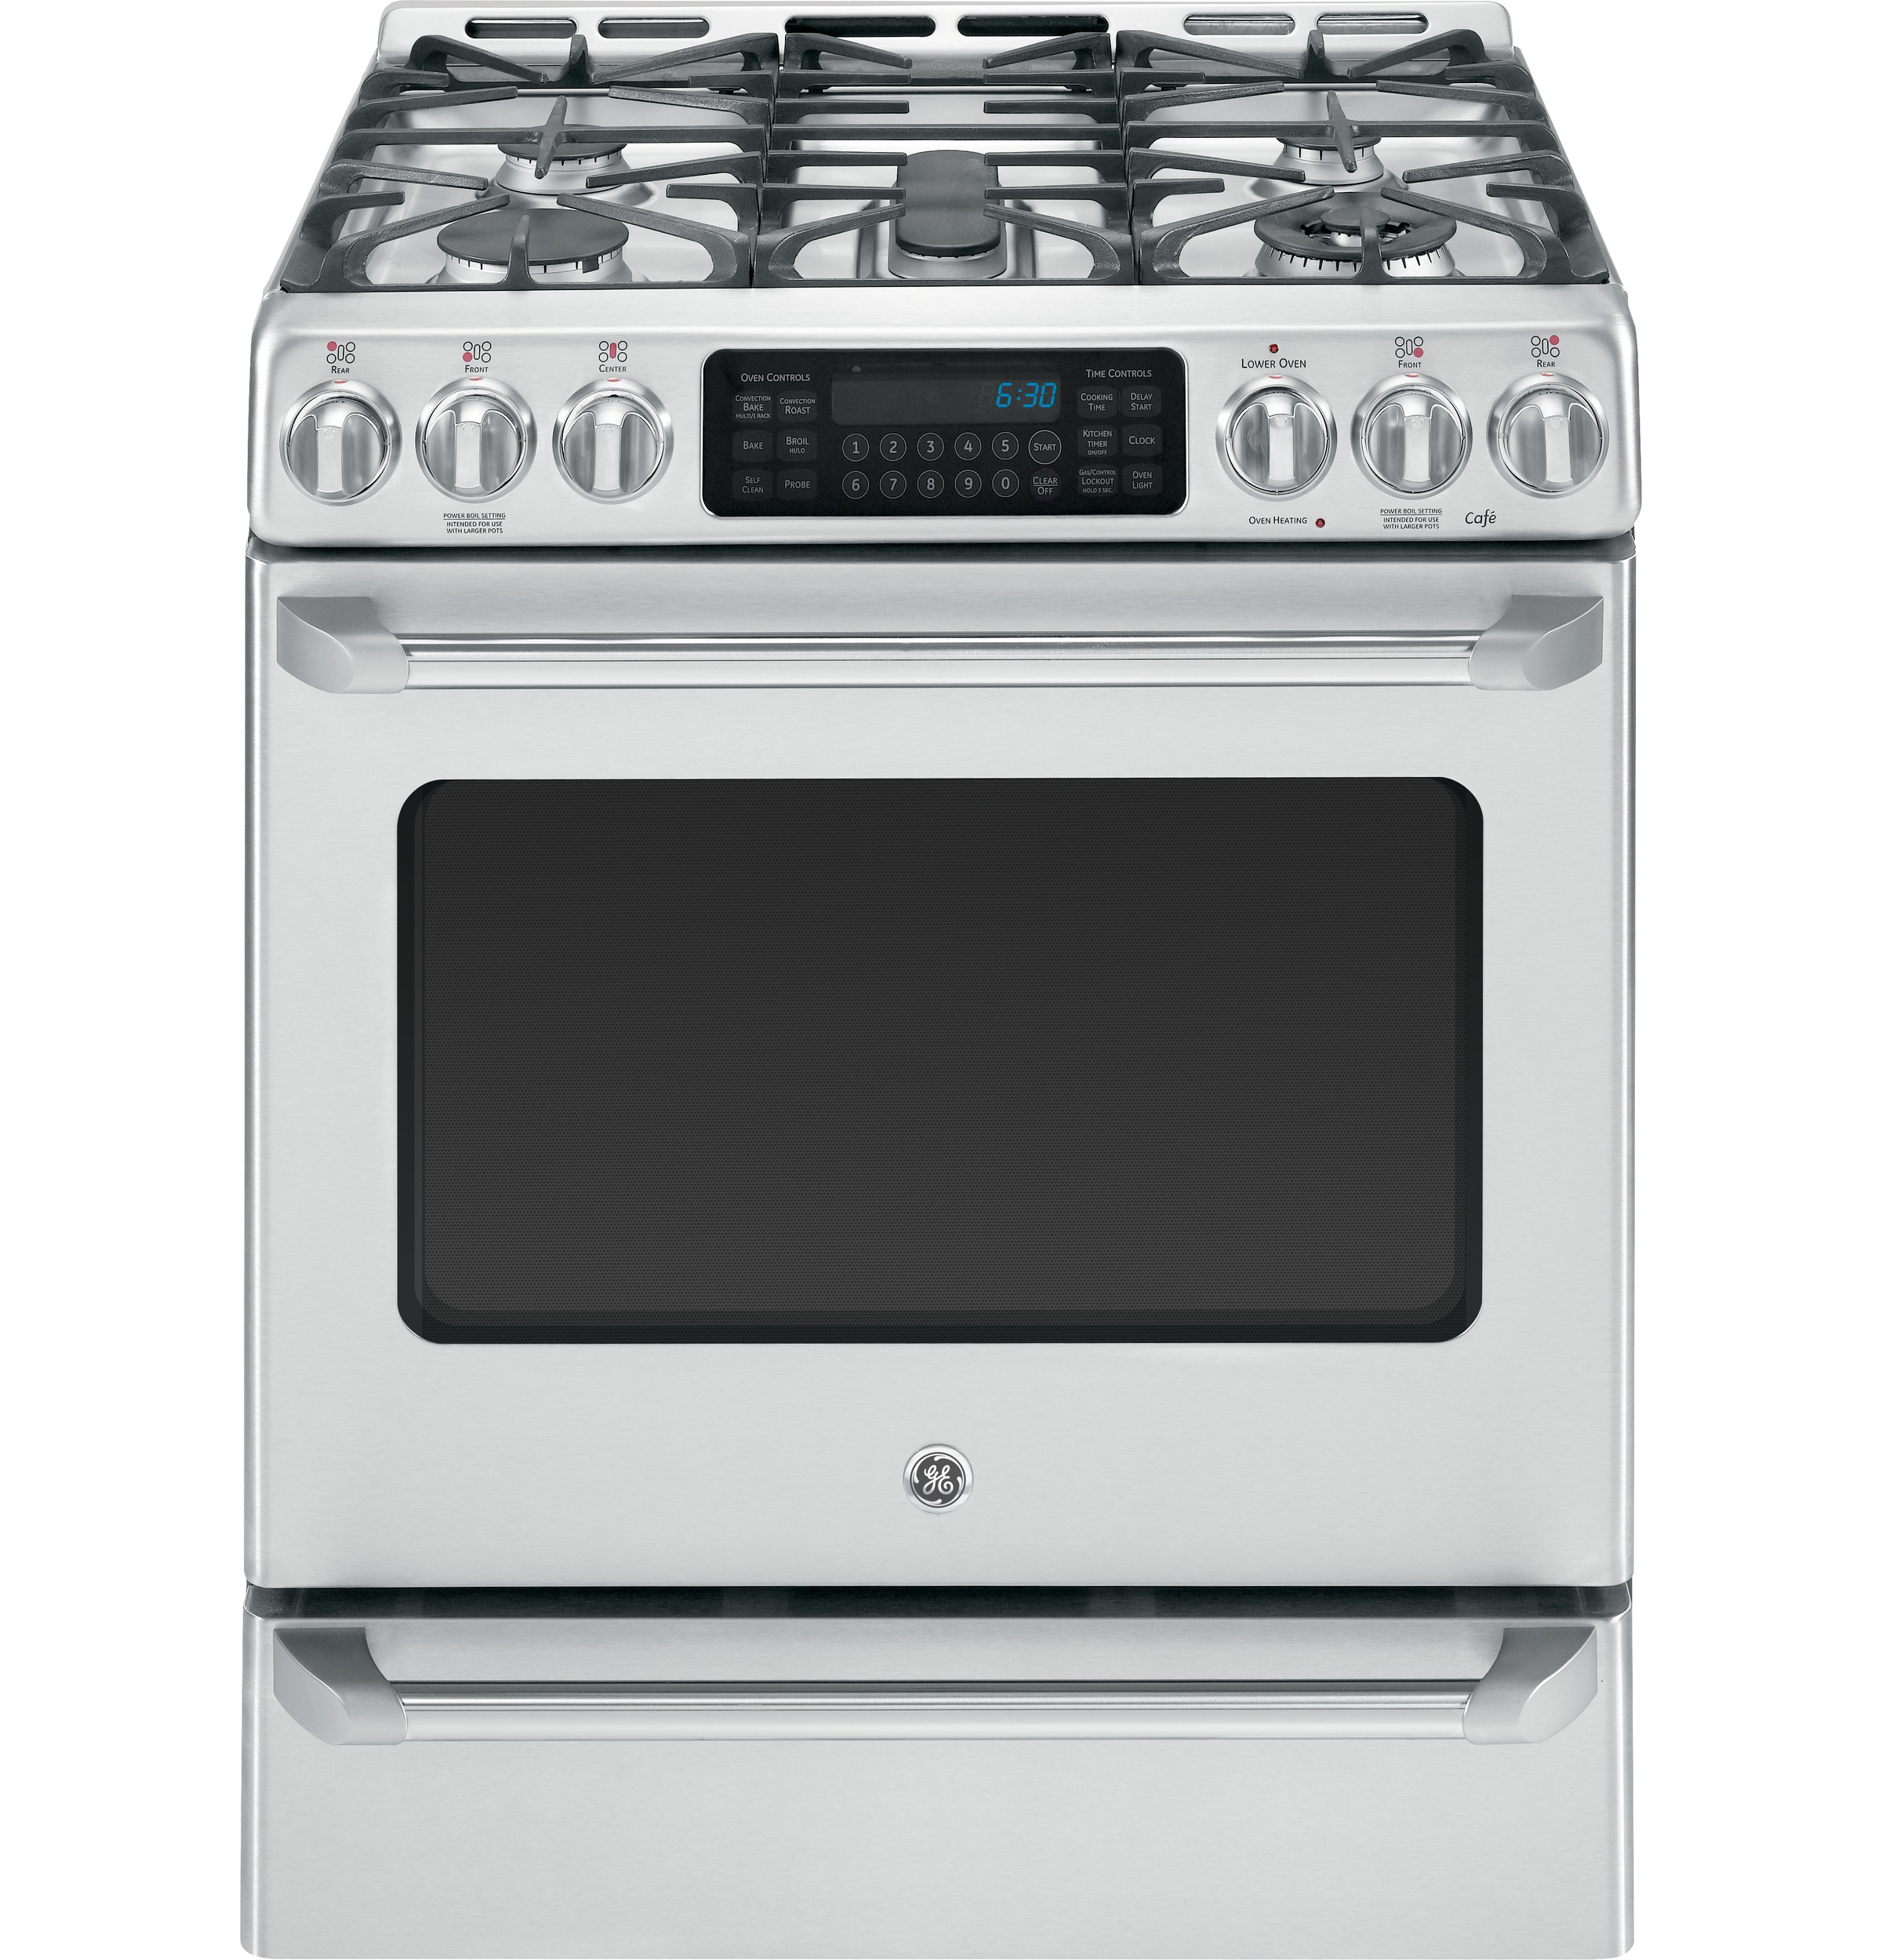 GE Cafe CGS985SETSS 6.4 cu. ft. Gas Range with Self-Cleaning Convection Ge Stainless Steel Gas Range